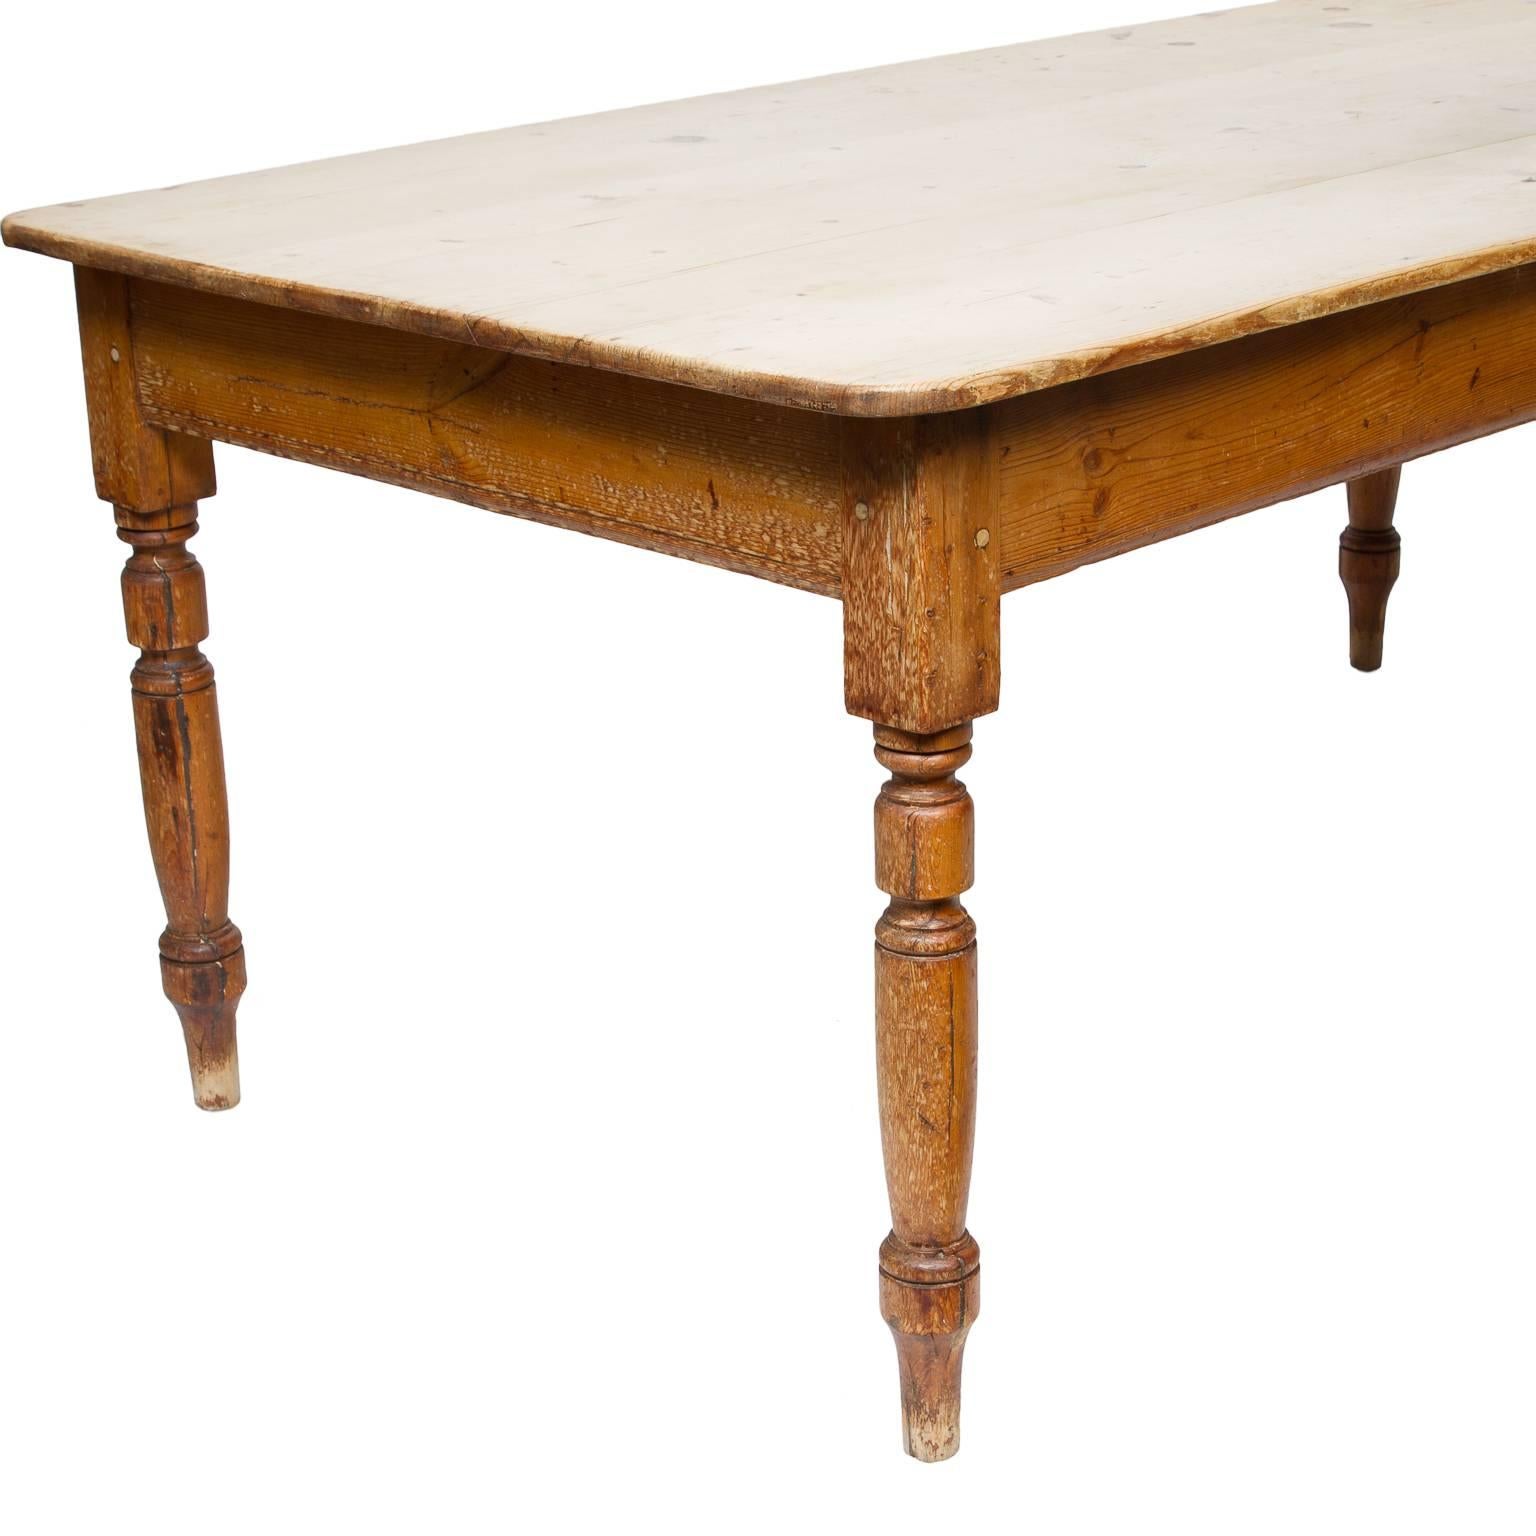 A fantastic 19th century pine farm table from England. There are four turned legs supporting an incredible scrub pine top. Beautiful English pine furniture, circa 1880s.